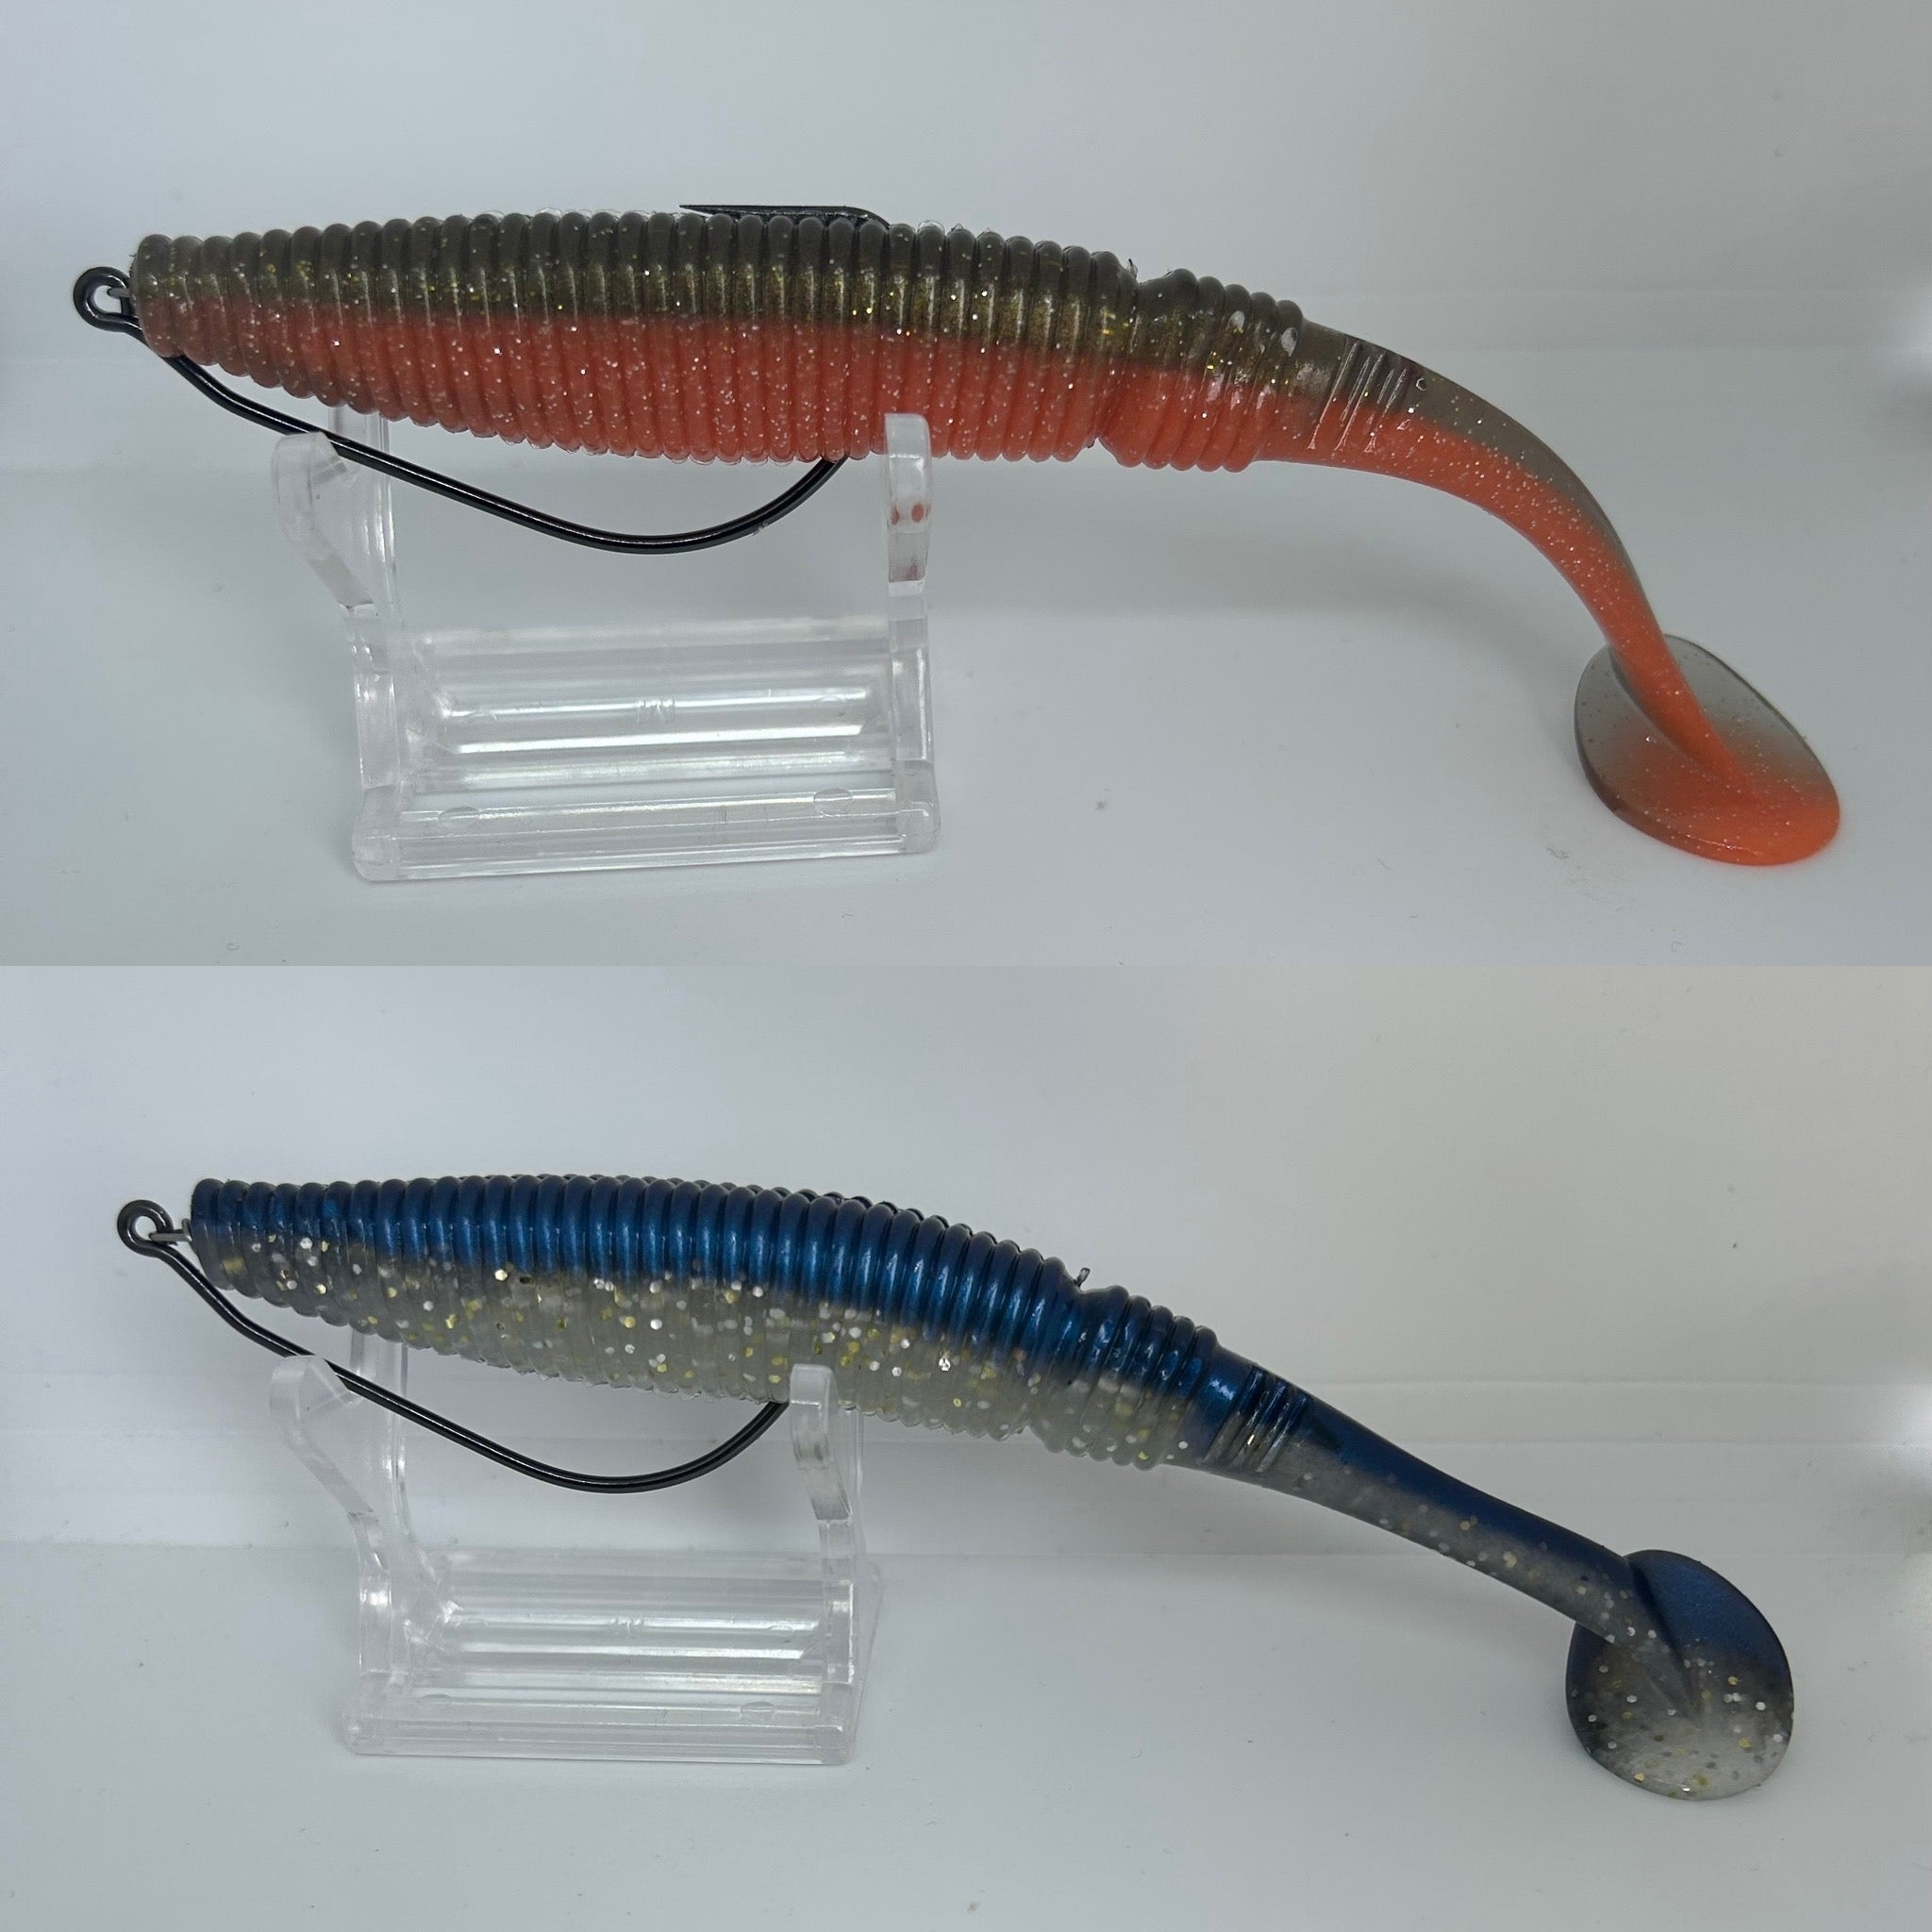  Compatible with Duckett BAITS LURES WORMS BASS FISHING